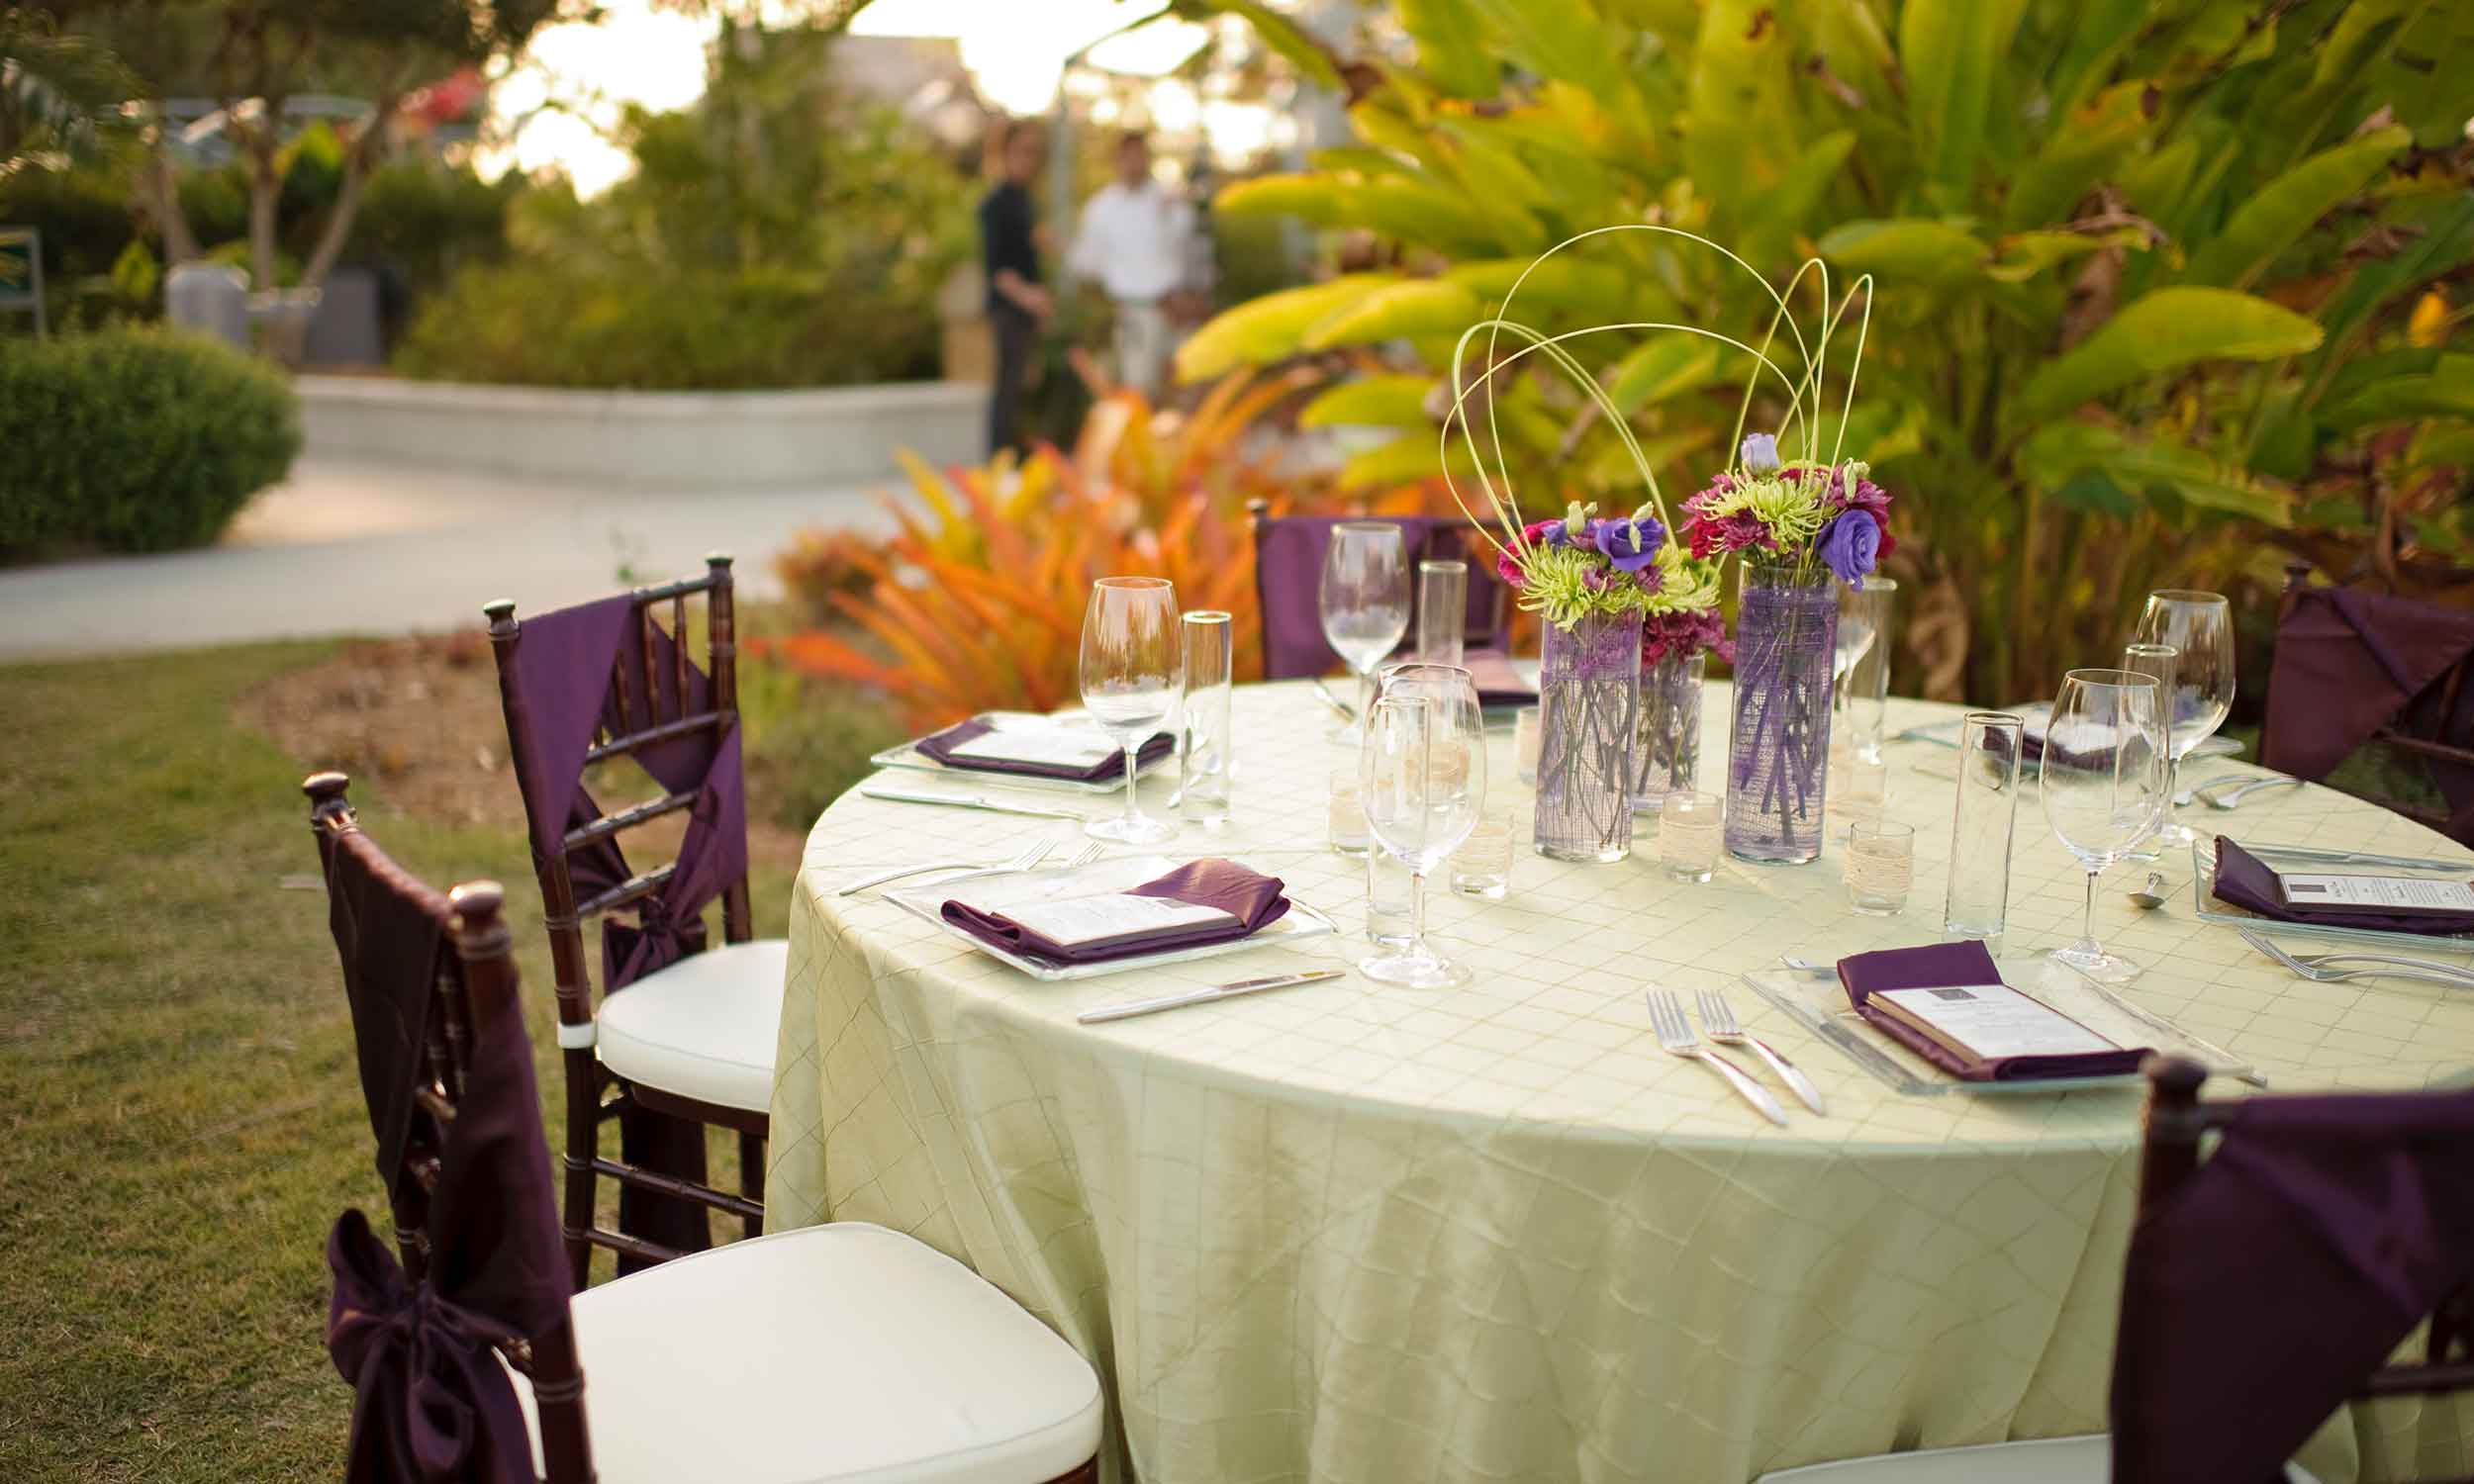 Outdoor seating and table setting at a corporate event in Naples, Florida